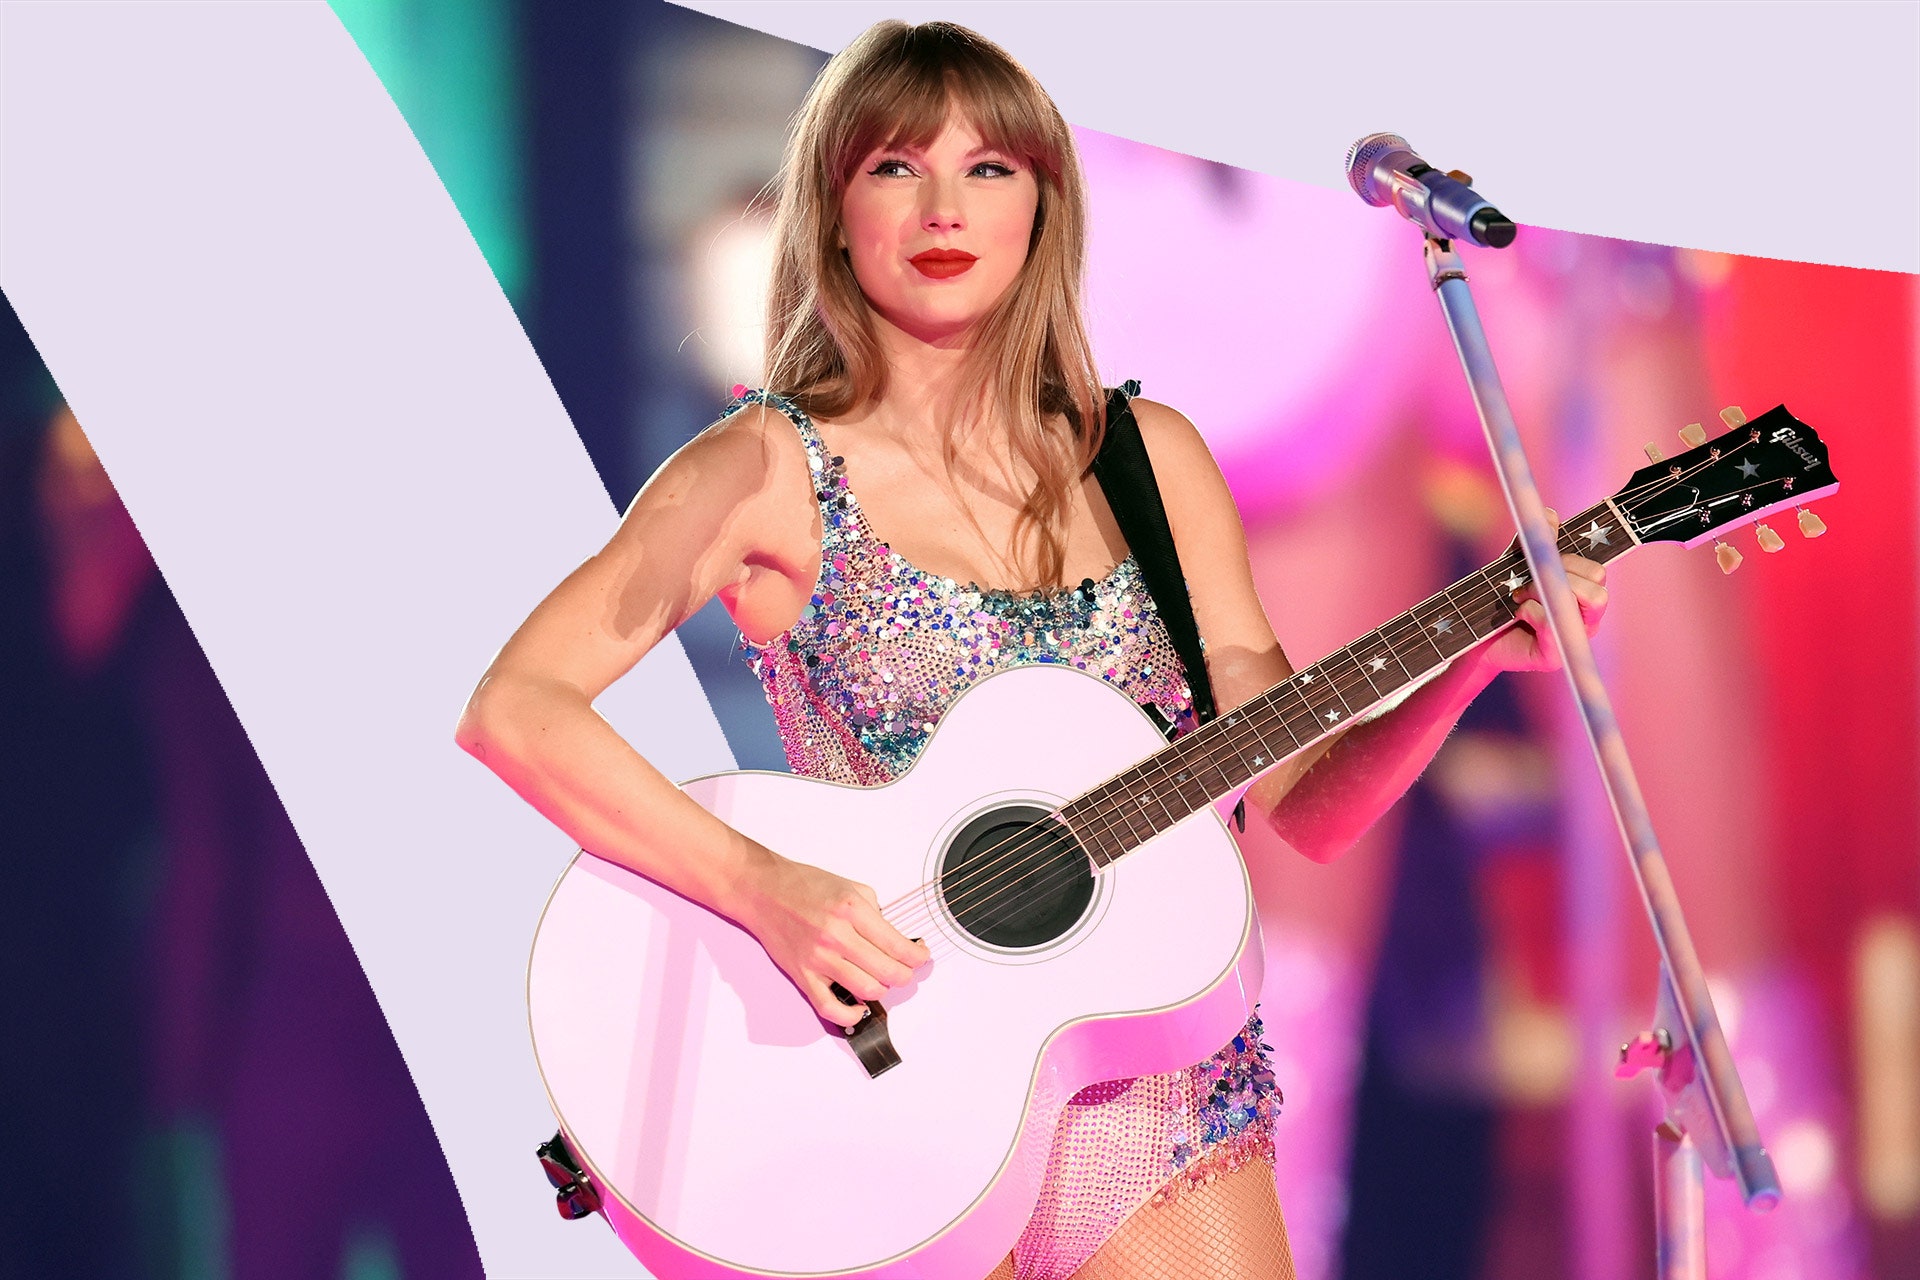 Taylor Swift Ethnicity: What Is Taylor Swift's Ethnicity?